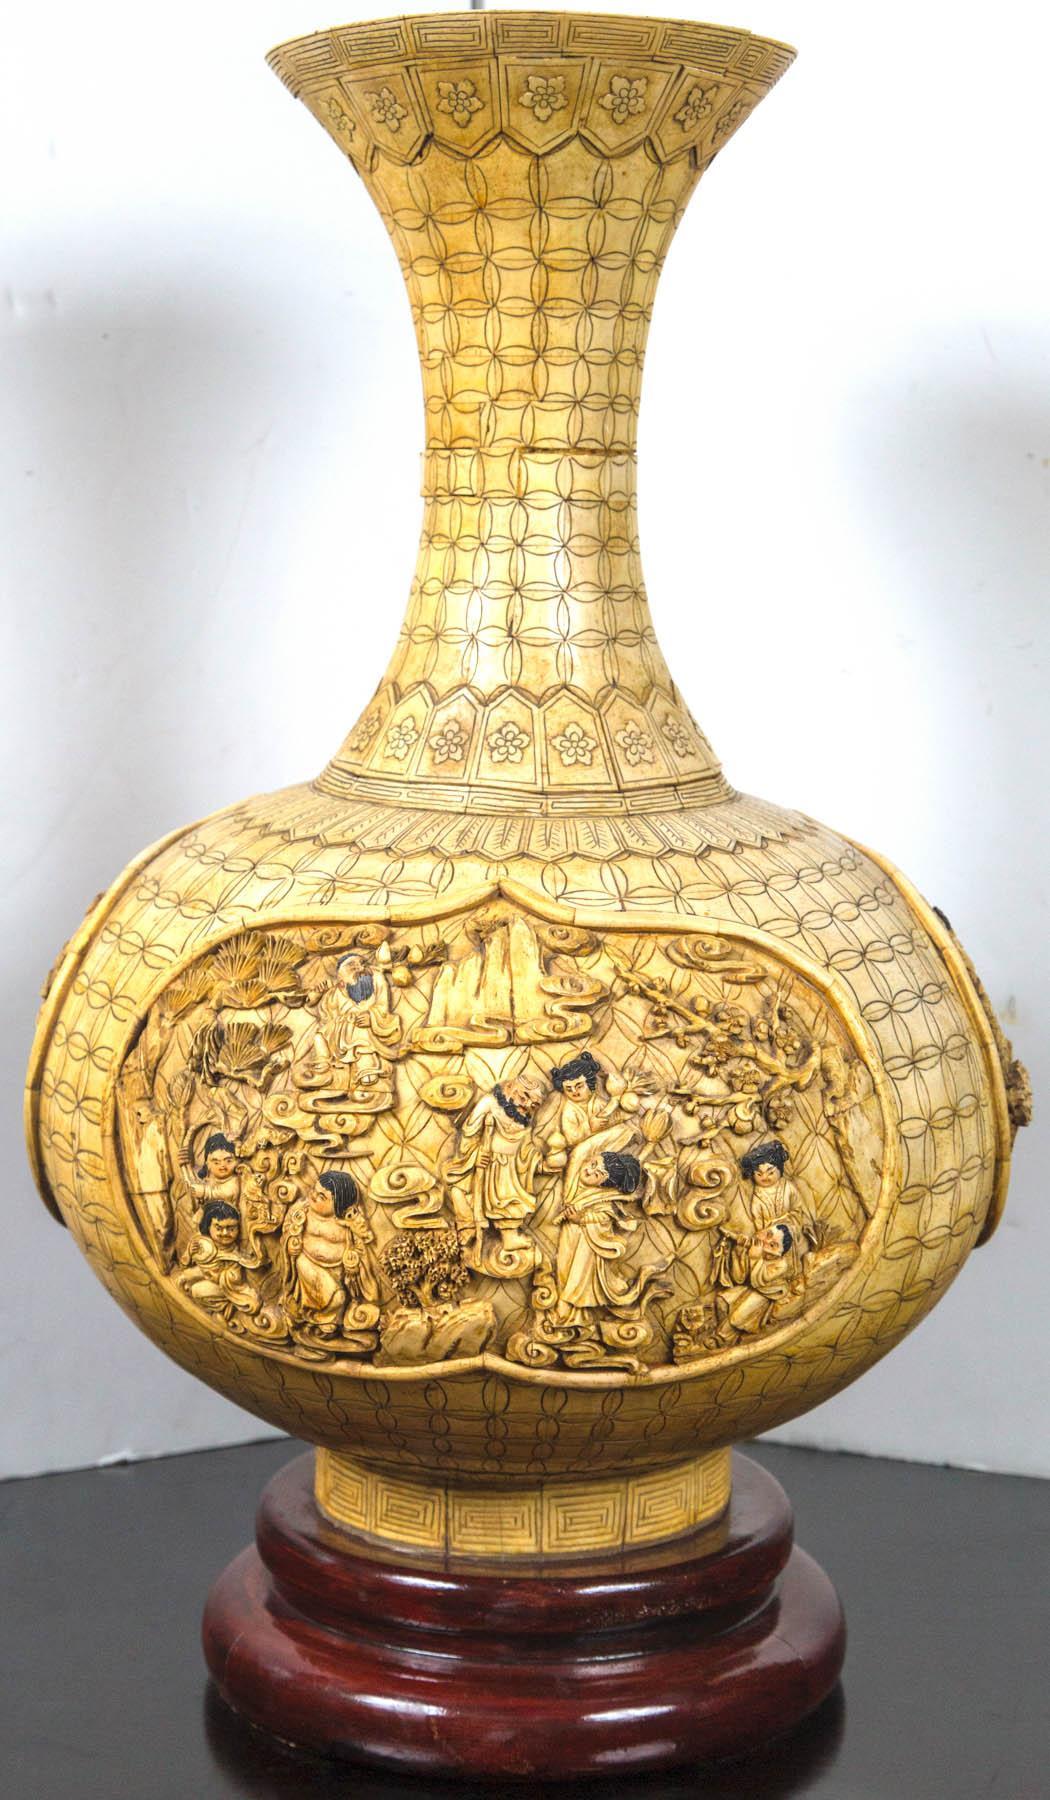 A three cartouches depicting scenes with people around the bulbous portion of the vase. Inside the opening at the top are carvings of animals. The vase itself is strictly decorative and will not hold water.
Pen work all around. Attached to wooden